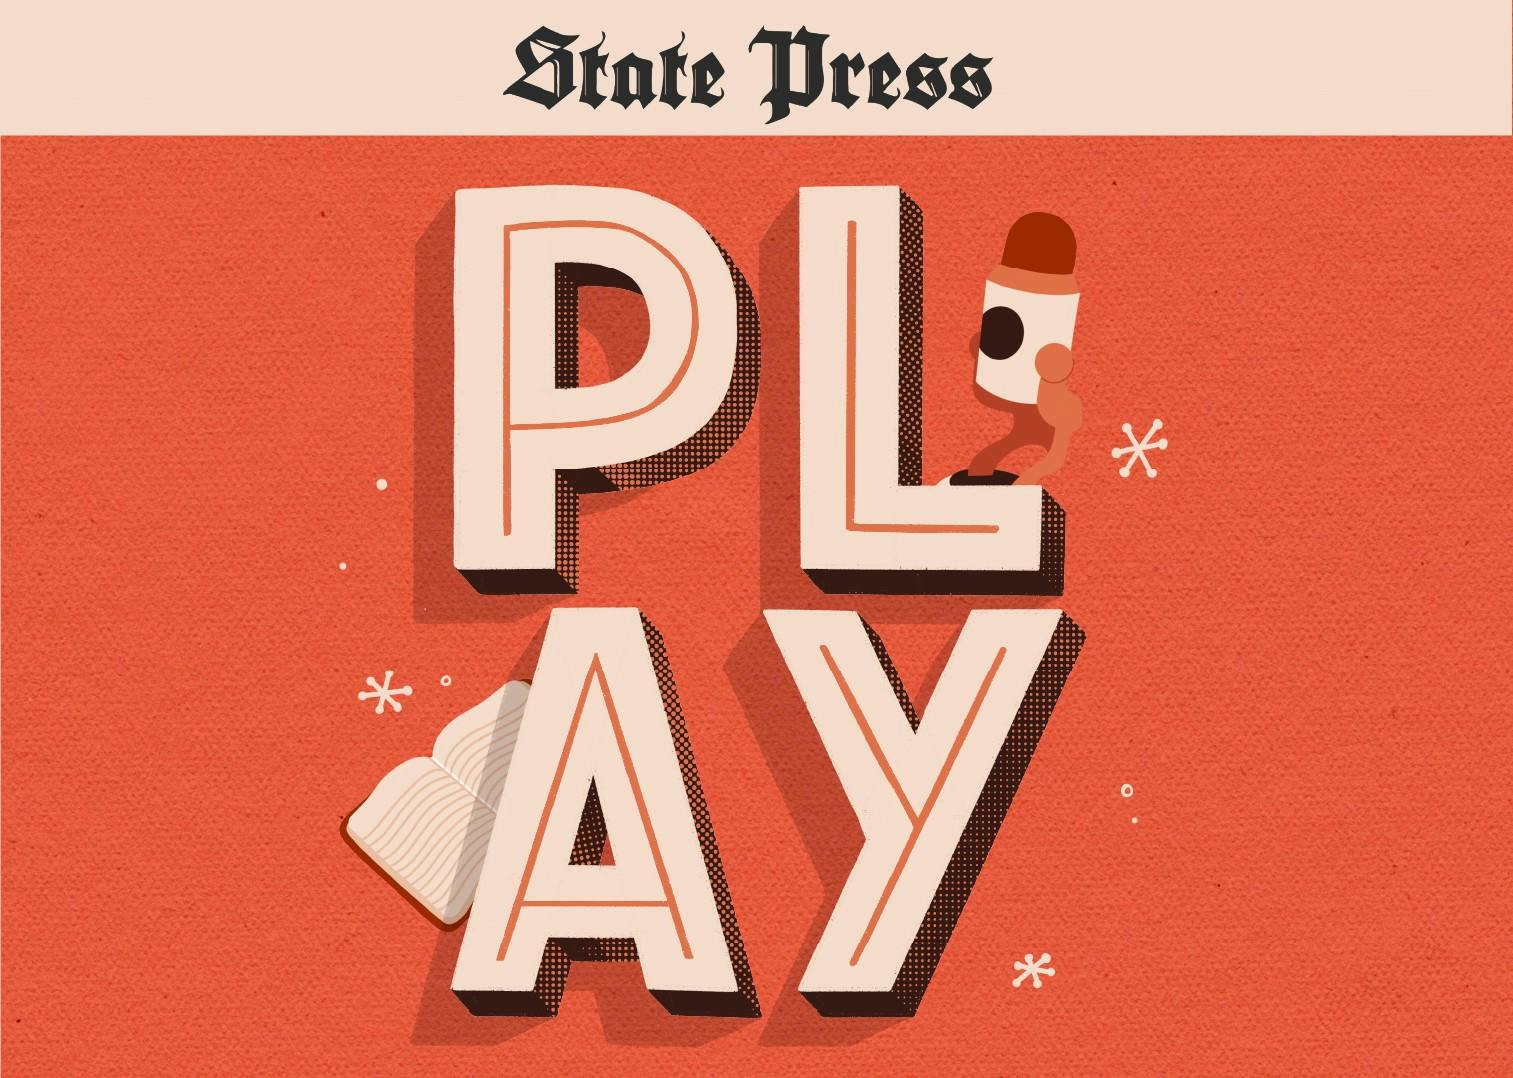 State Press Play: Let's talk about gender - The Arizona State Press